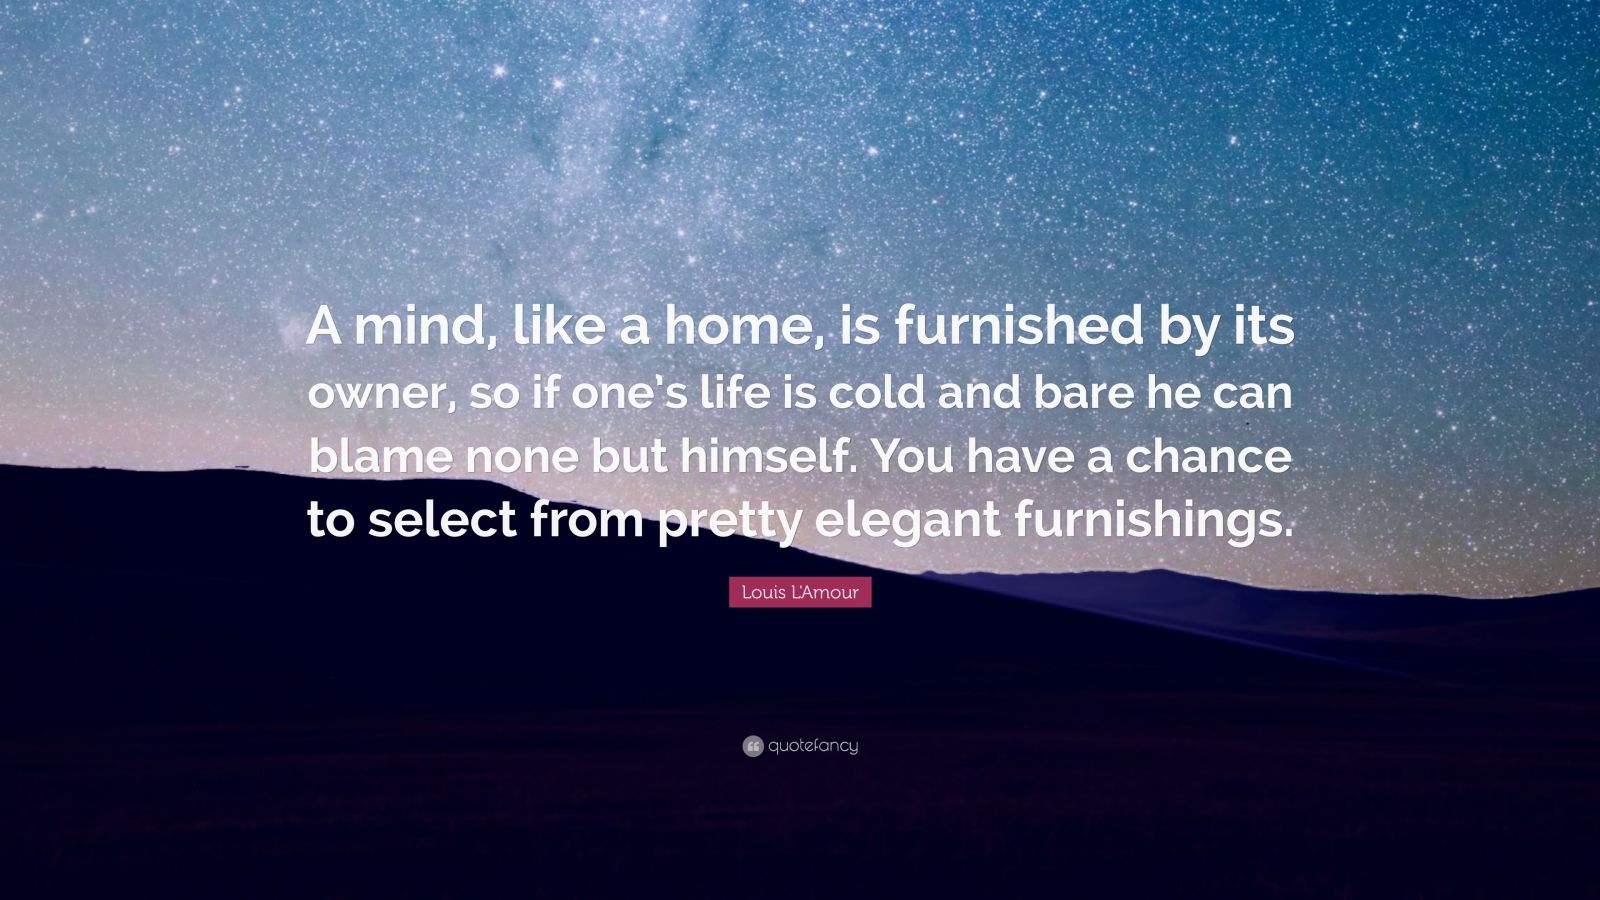 Louis L&#39;Amour Quote: “A mind, like a home, is furnished by its owner, so if one’s life is cold ...